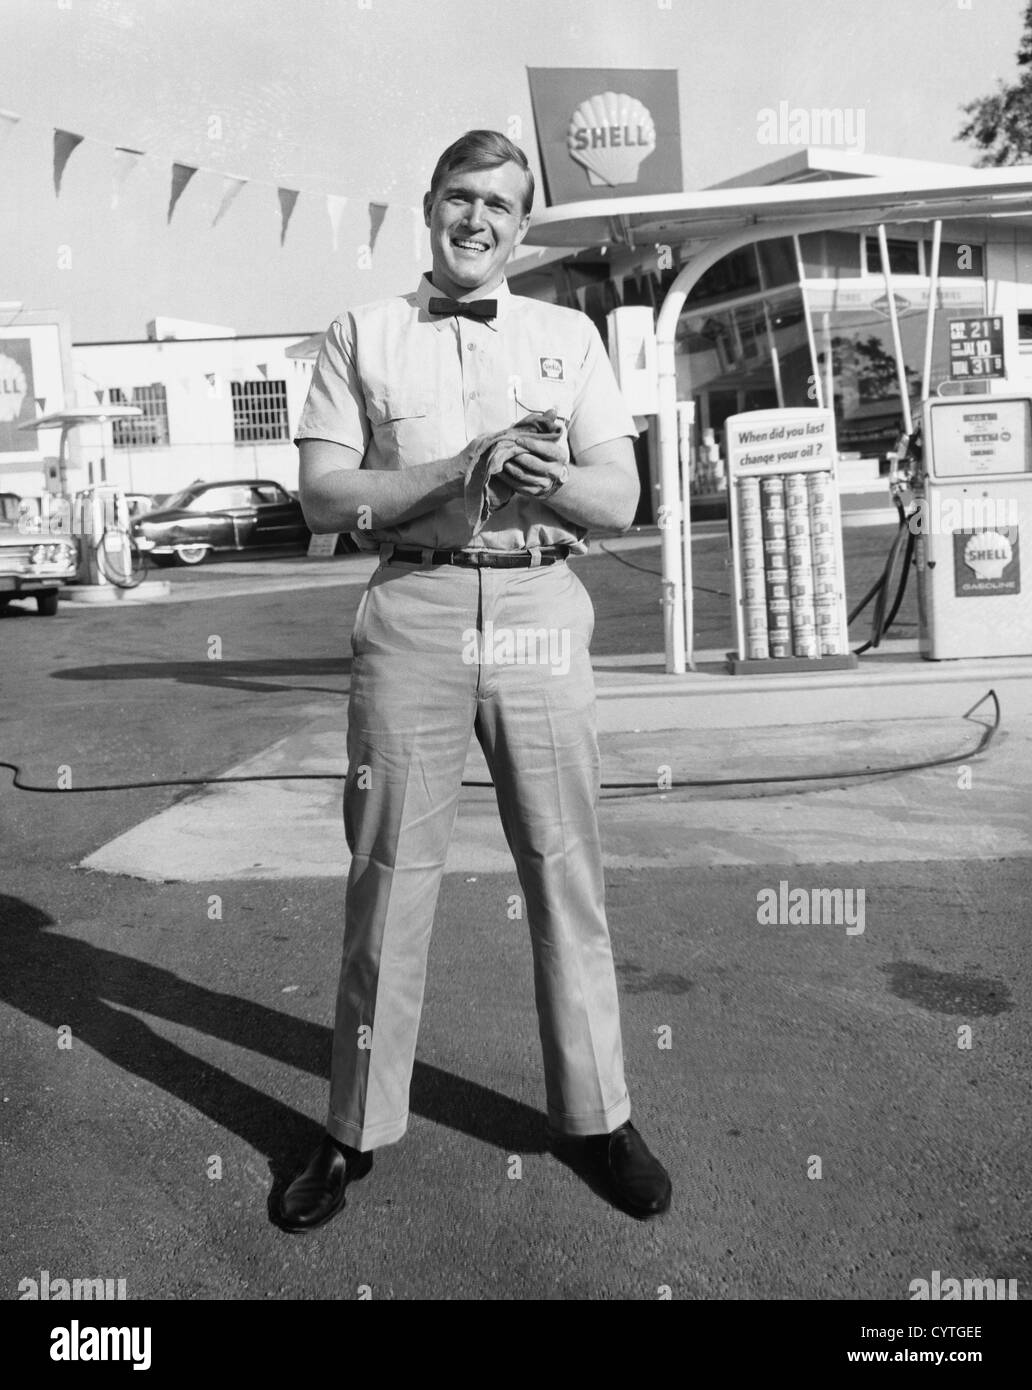 Gas station attendant standing in front of station Stock Photo